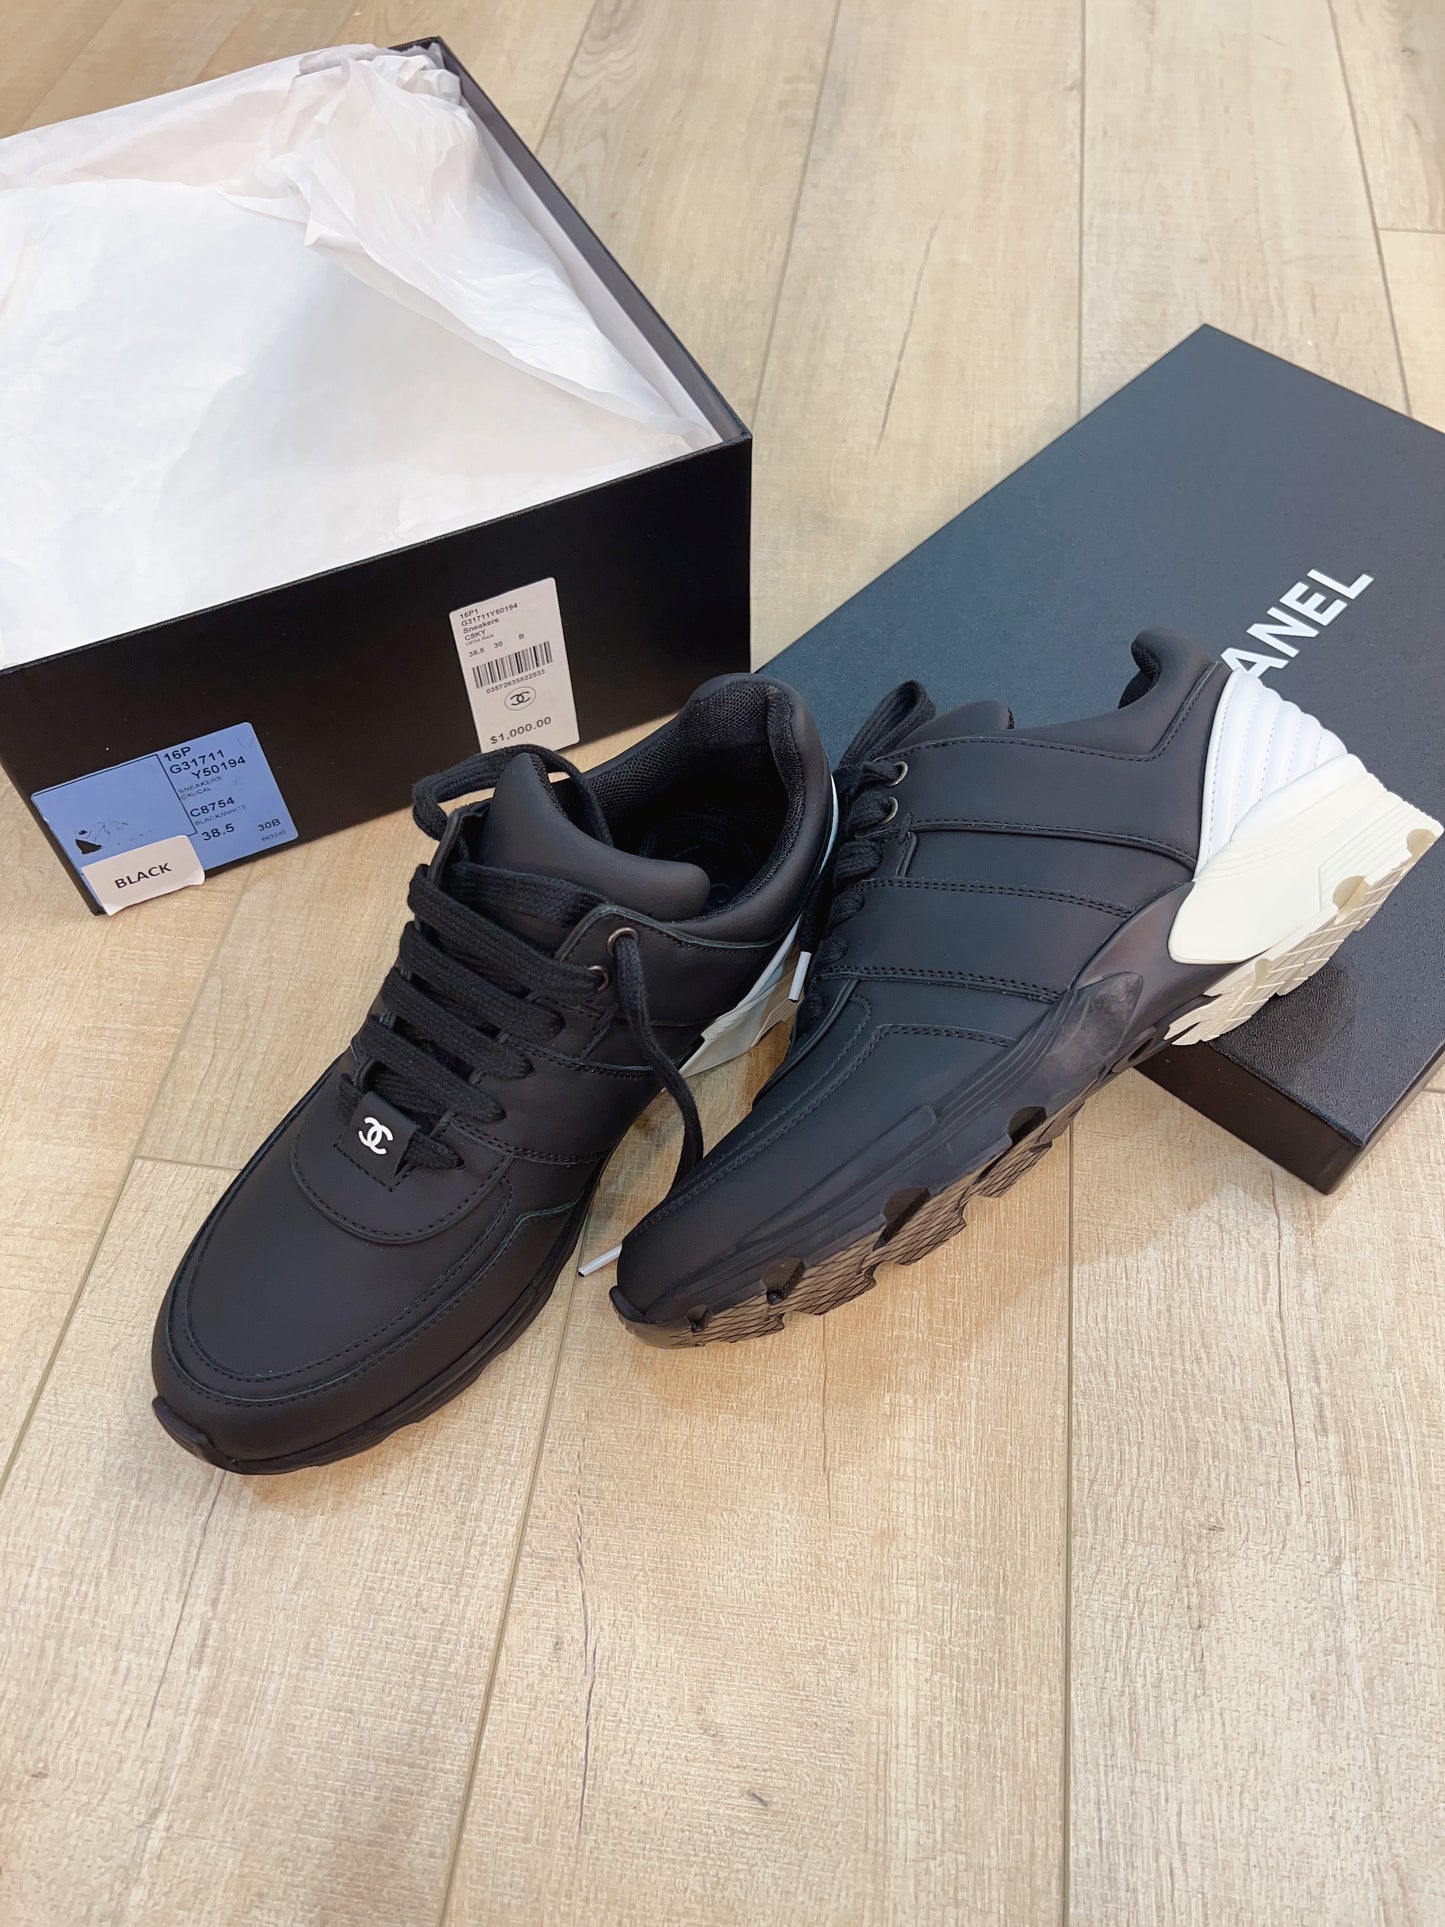 Chanel Leather Trainers Black Size38.5 New